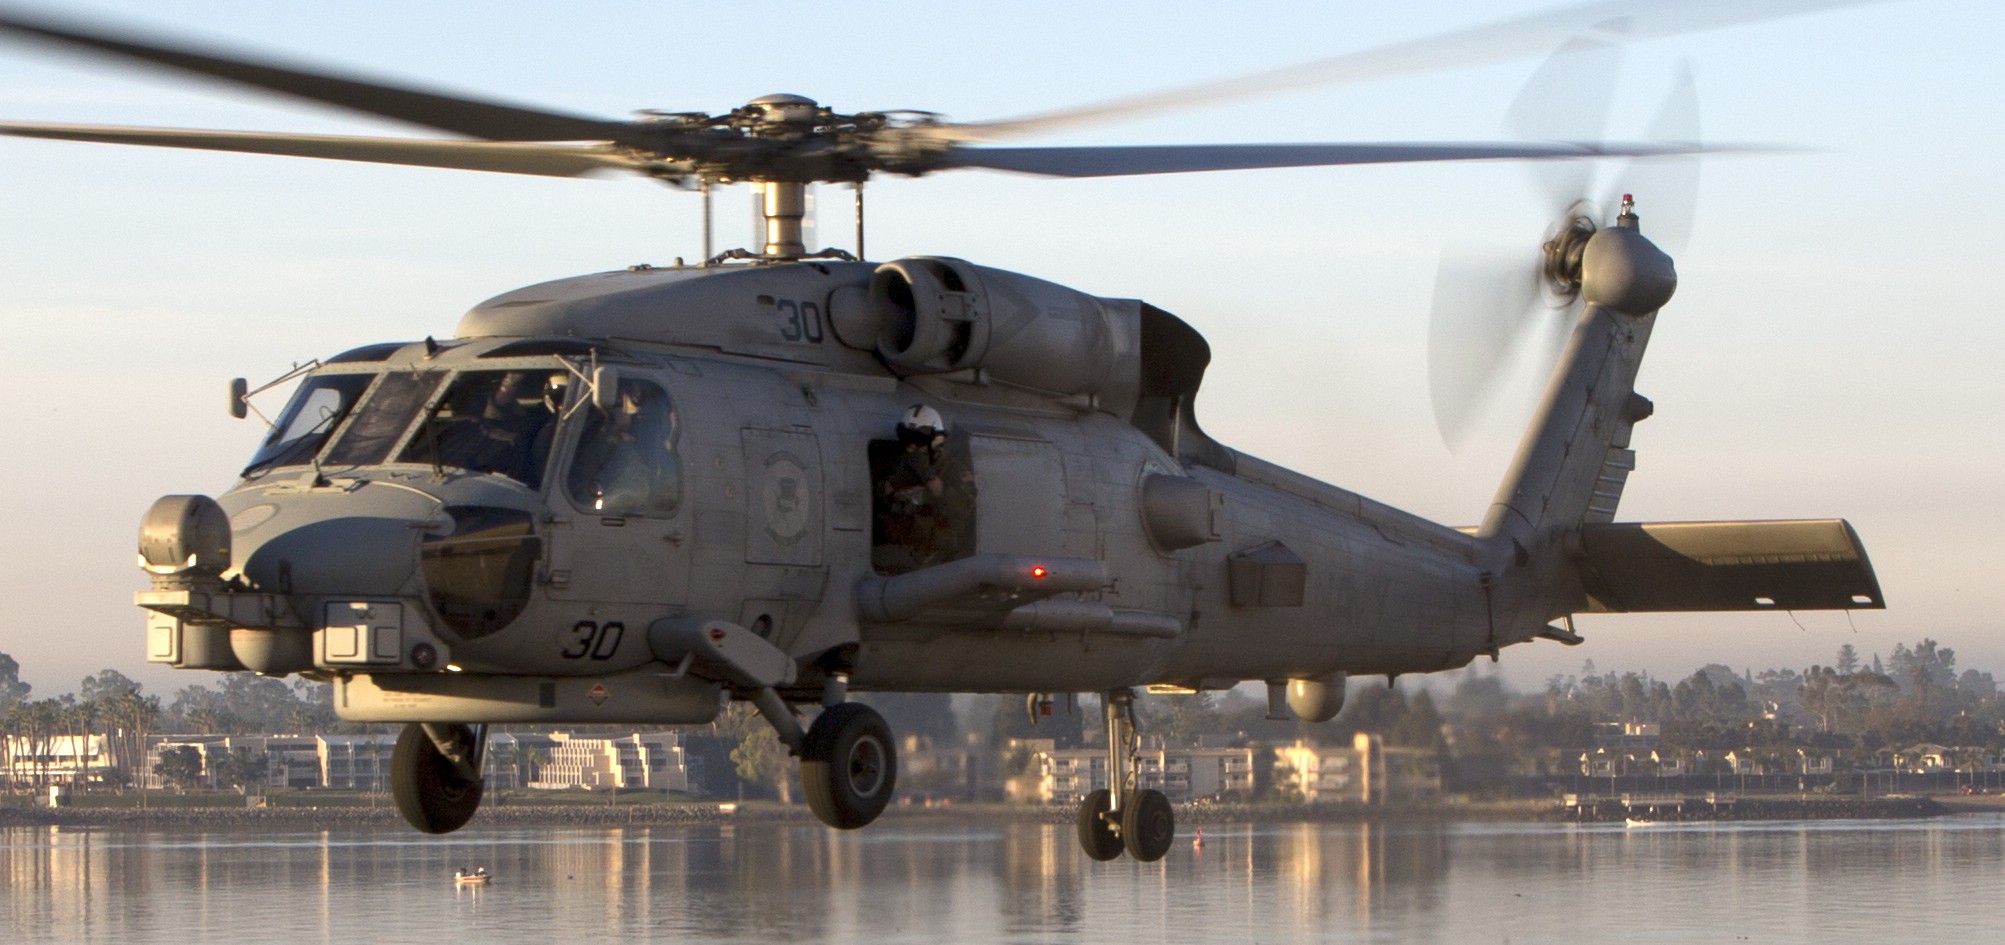 hsm-35 magicians helicopter maritime strike squadron us navy mh-60r seahawk san diego 36